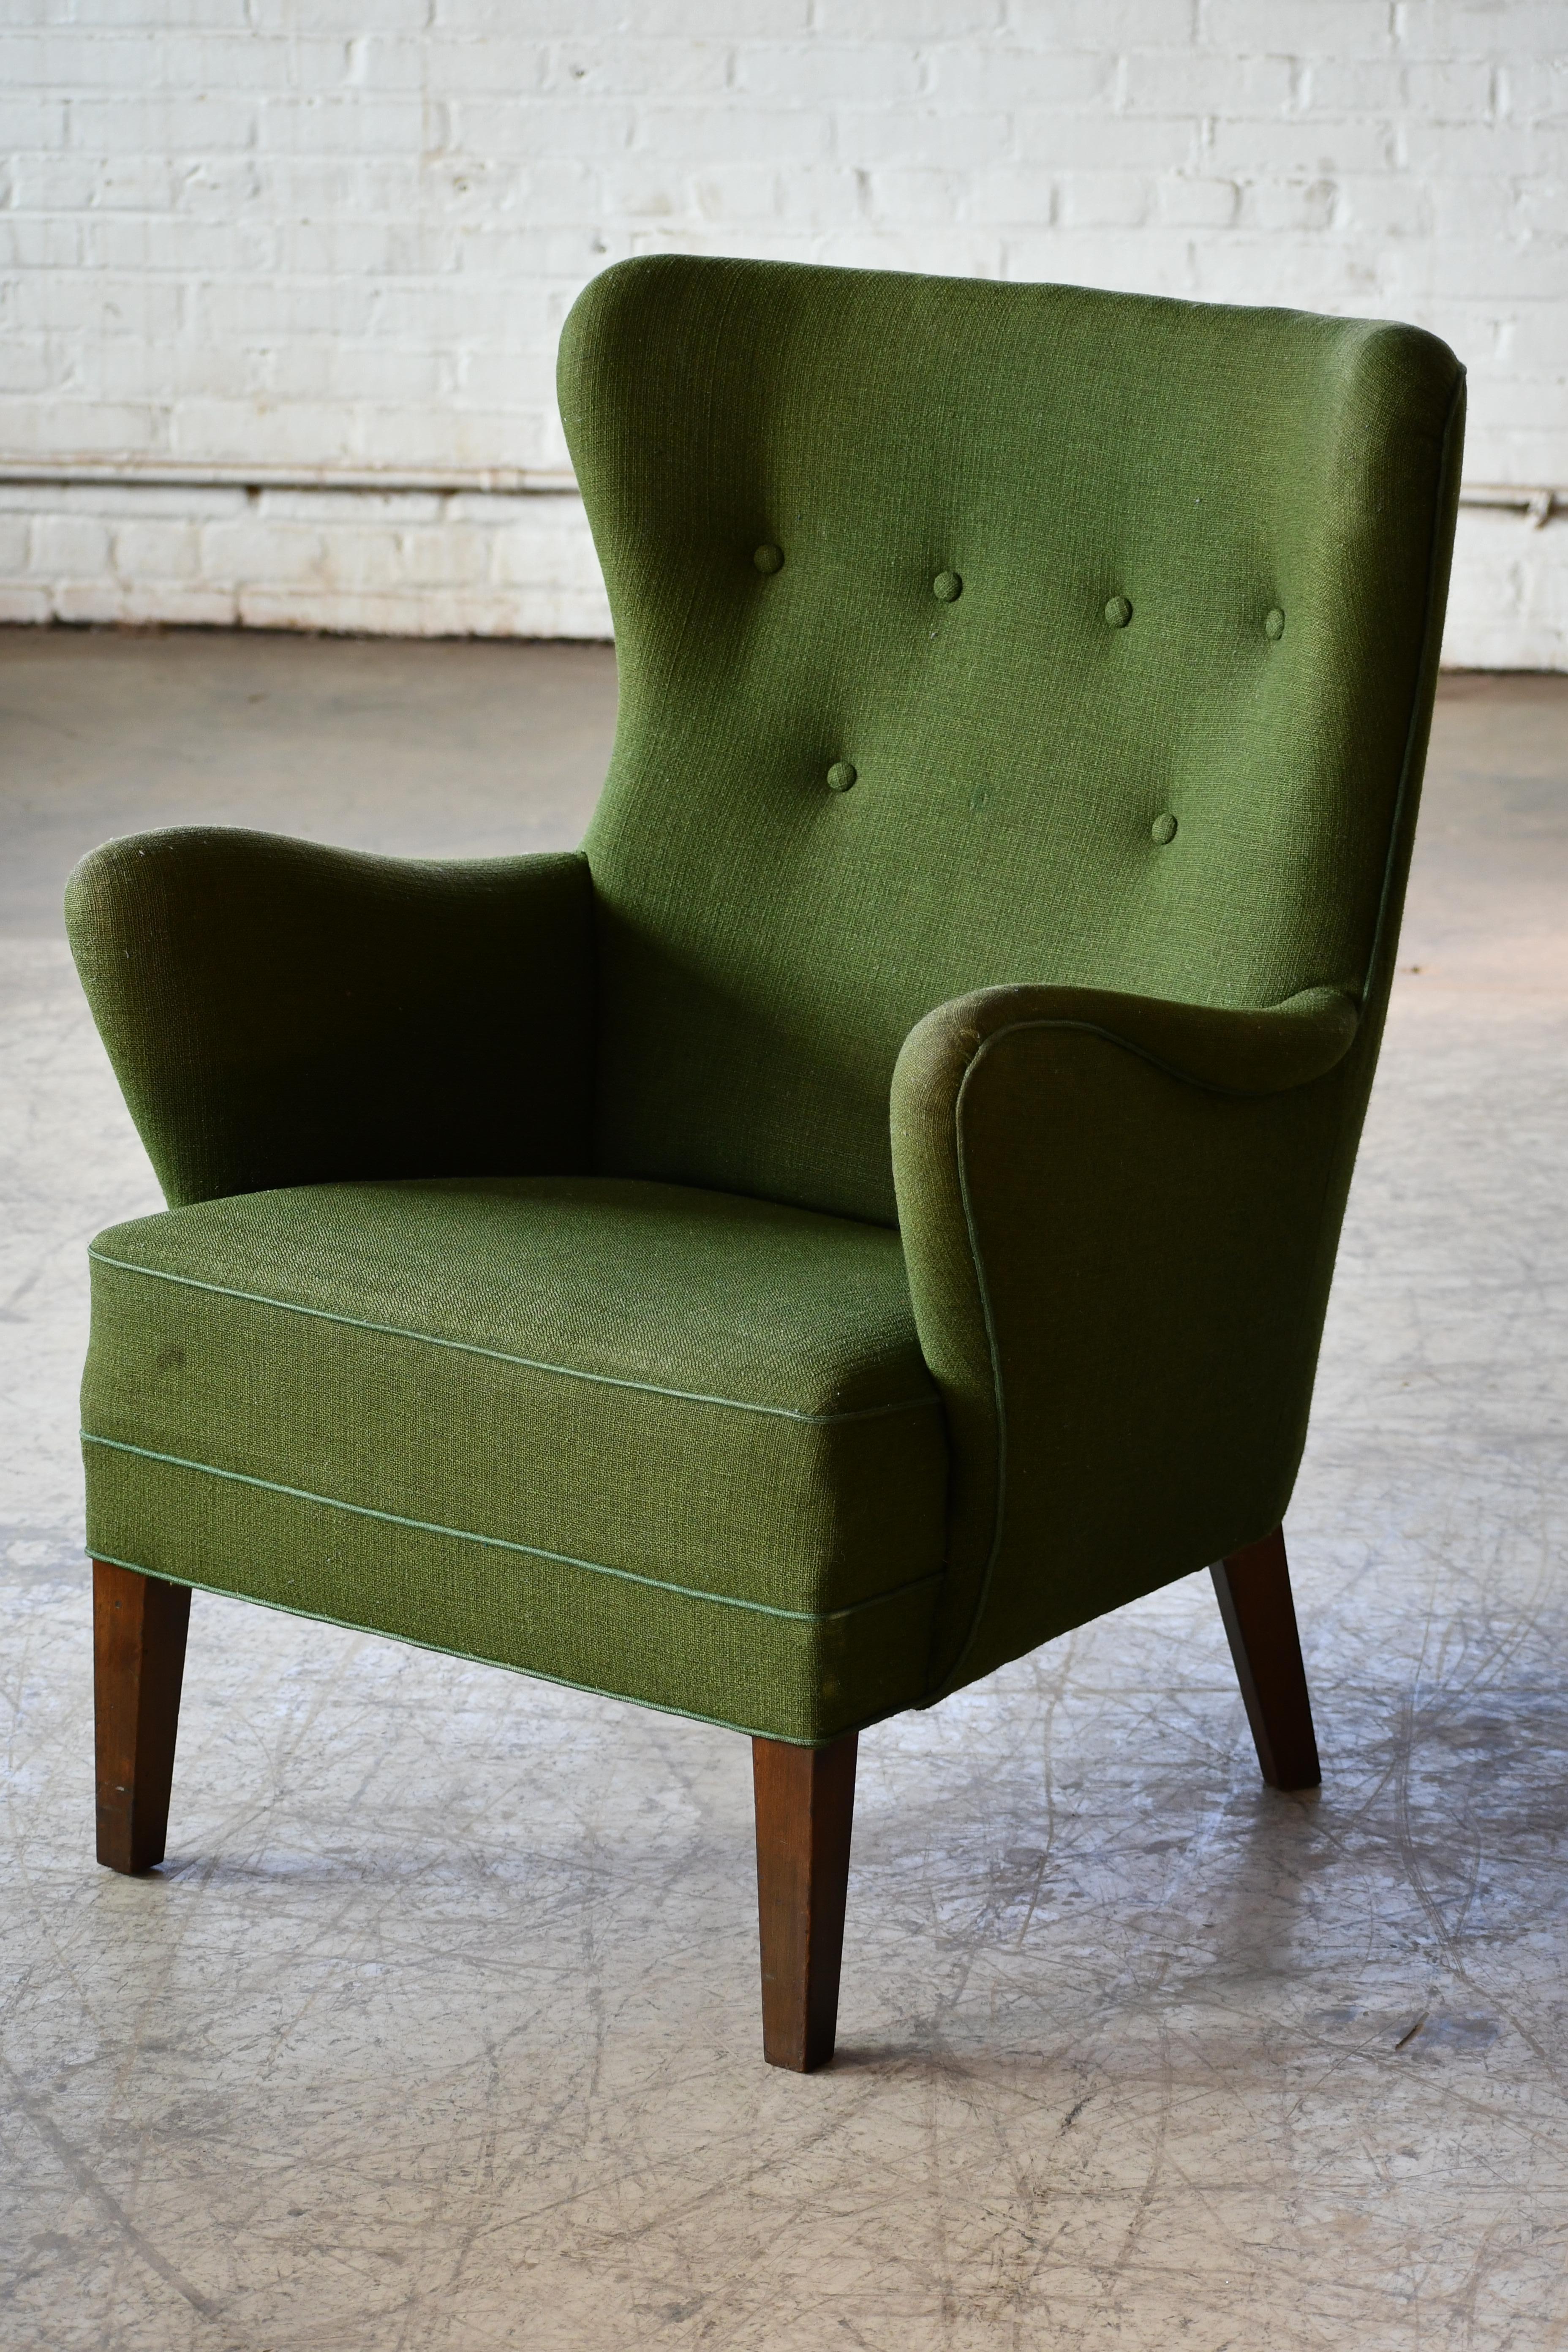 Danish 1940s Lassen Style Easy Chair in Green Wool Fabric Mahogany Legs In Good Condition For Sale In Bridgeport, CT